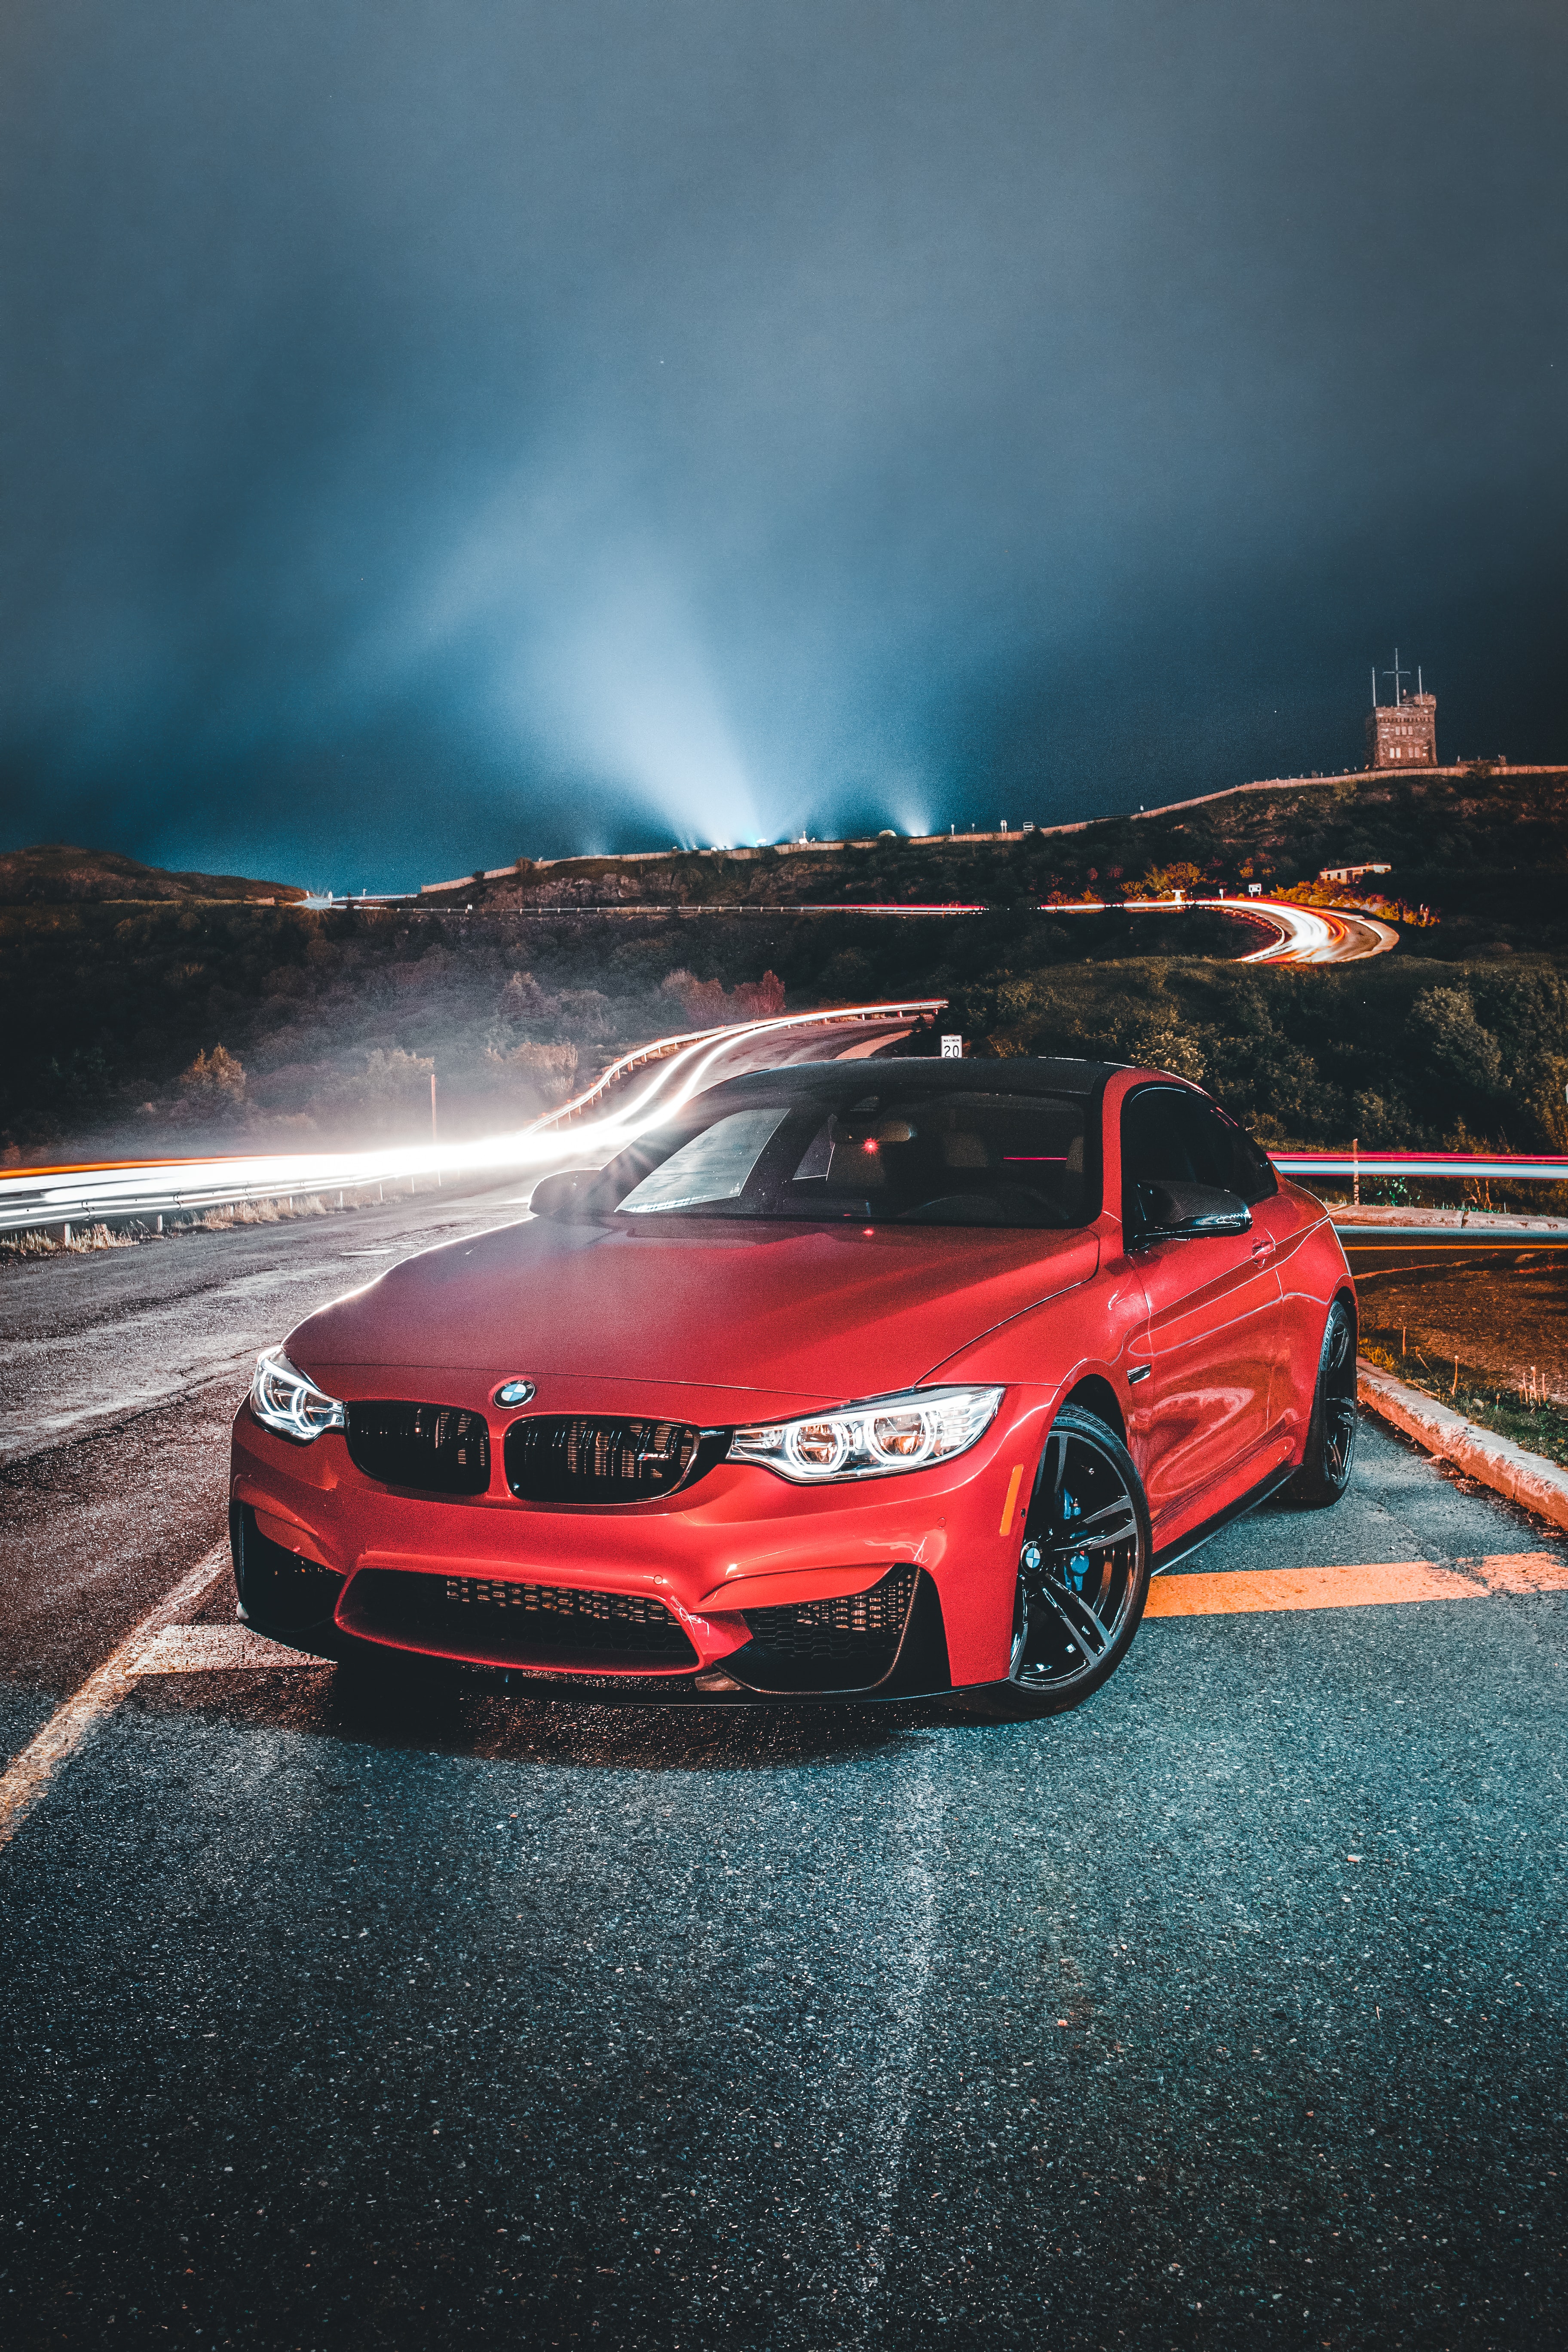 Free HD bmw 320i, bmw, machine, front view, cars, red, road, car